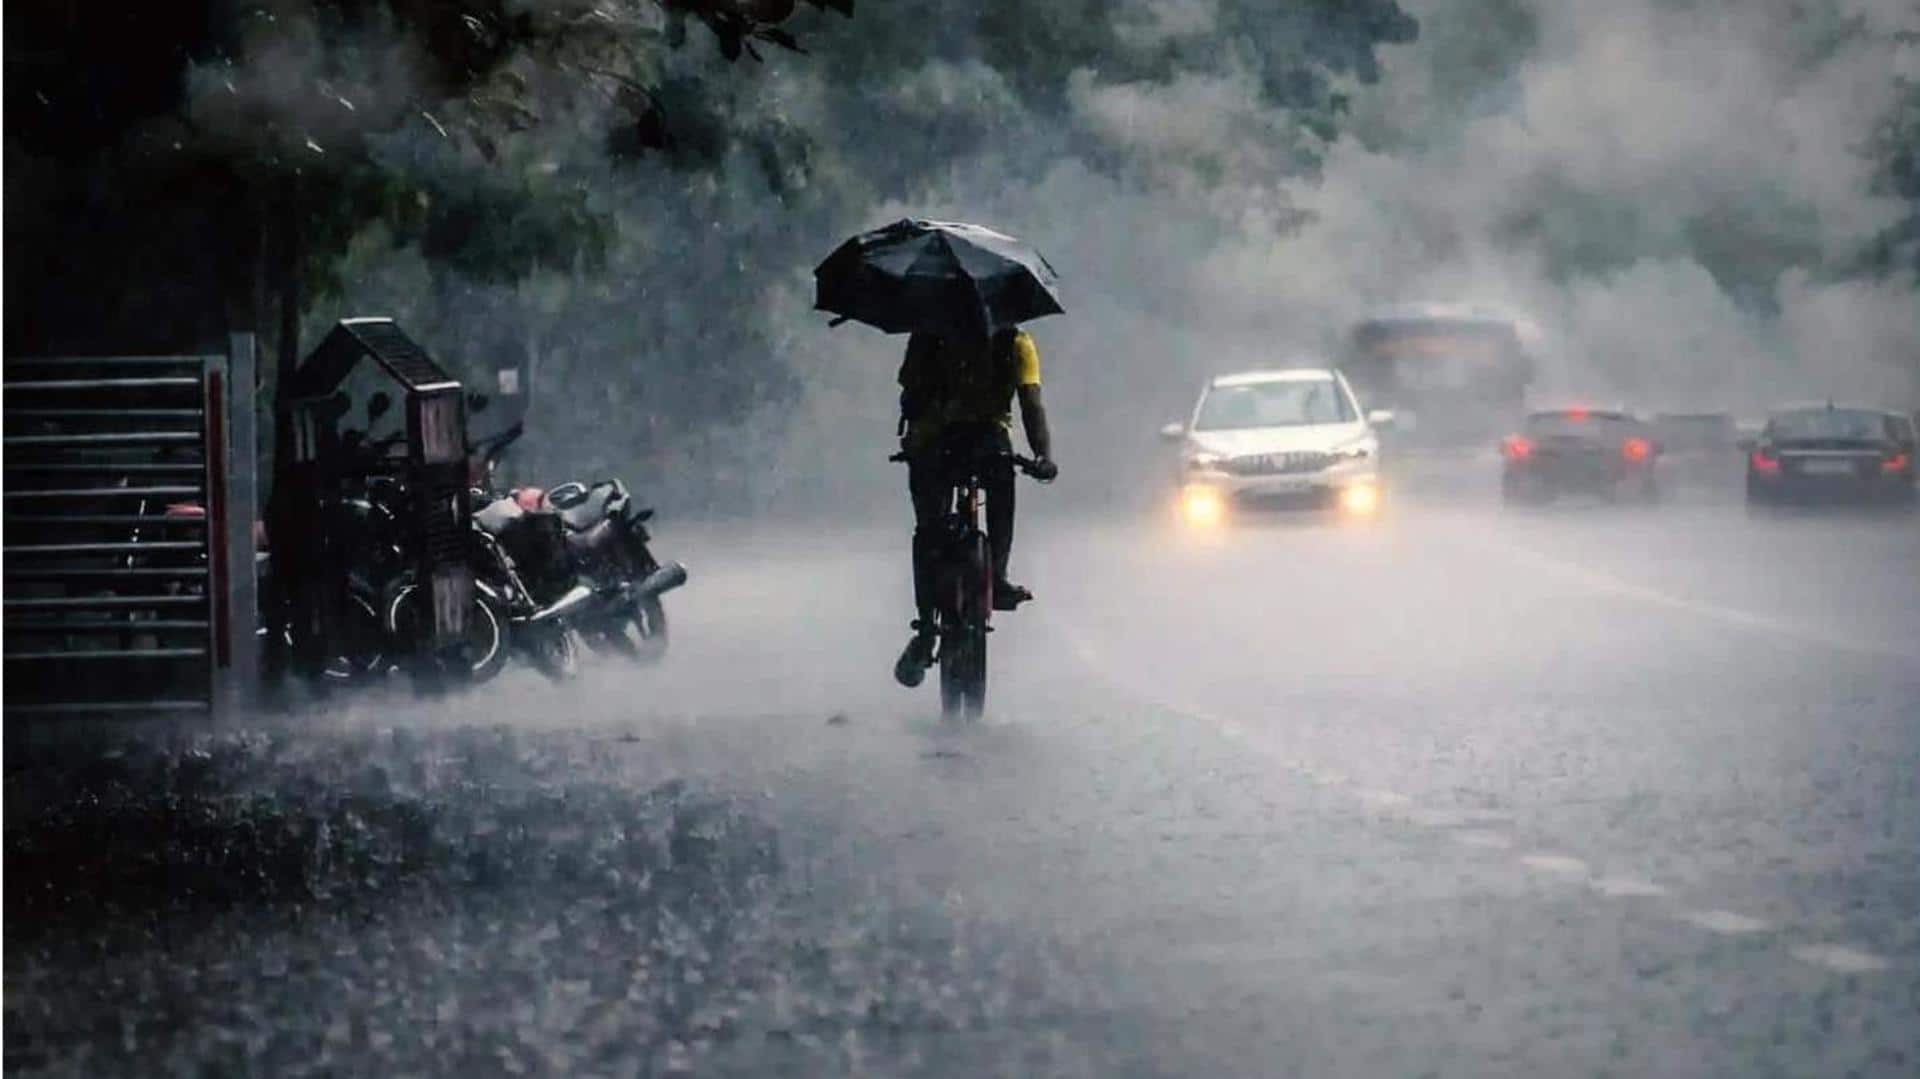 IMD predicts rain, thunderstorm in these states: Check forecast here